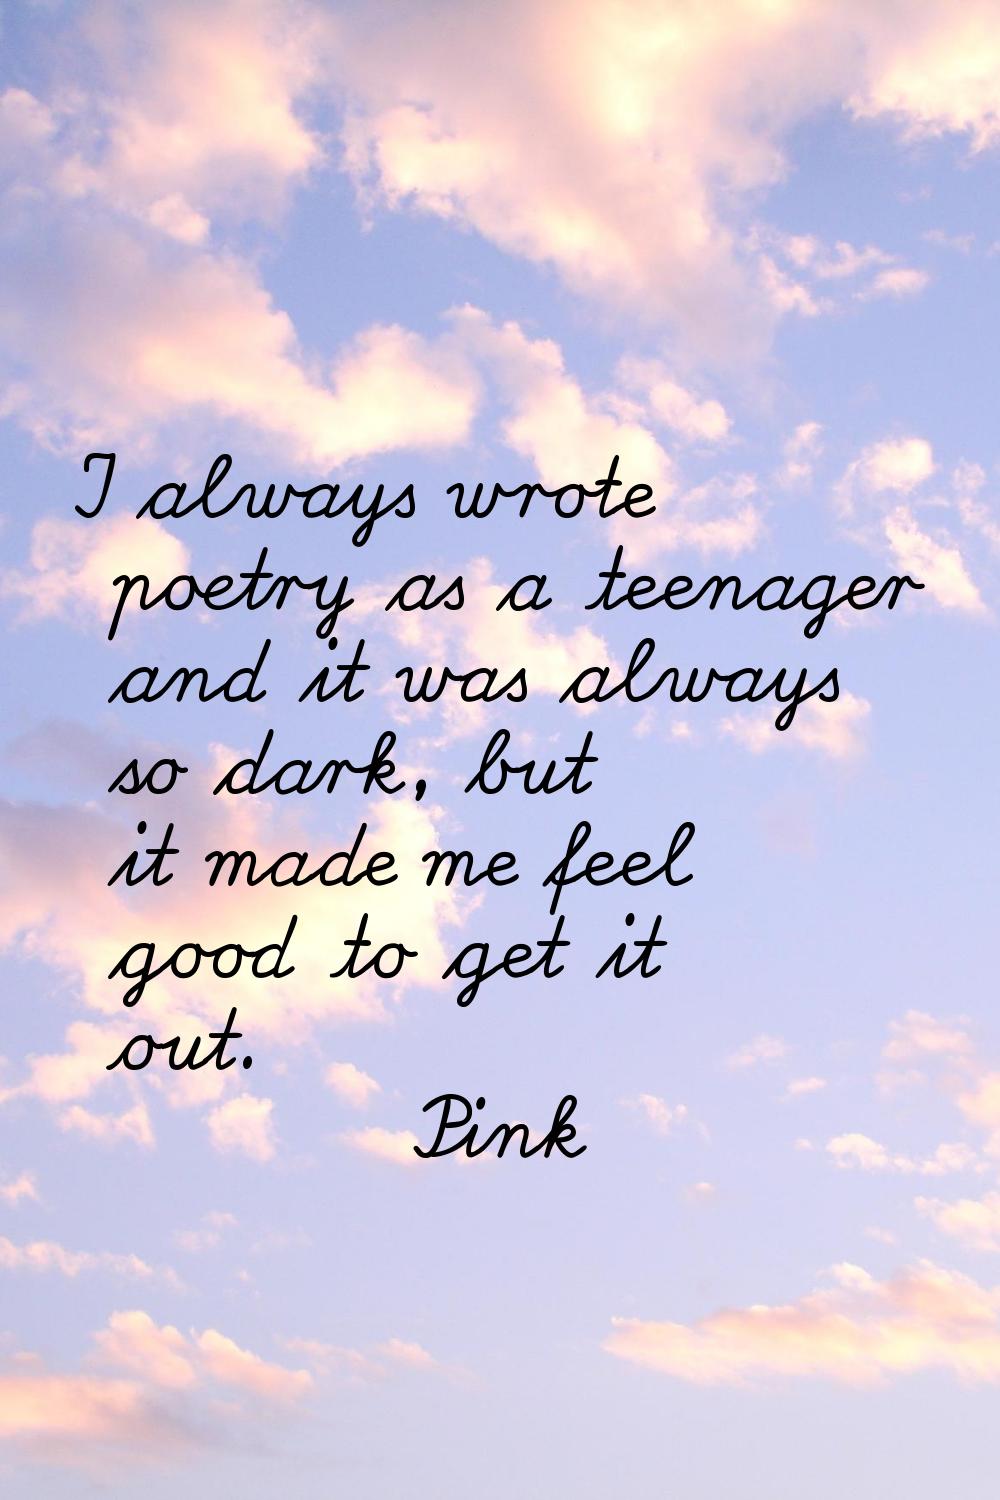 I always wrote poetry as a teenager and it was always so dark, but it made me feel good to get it o